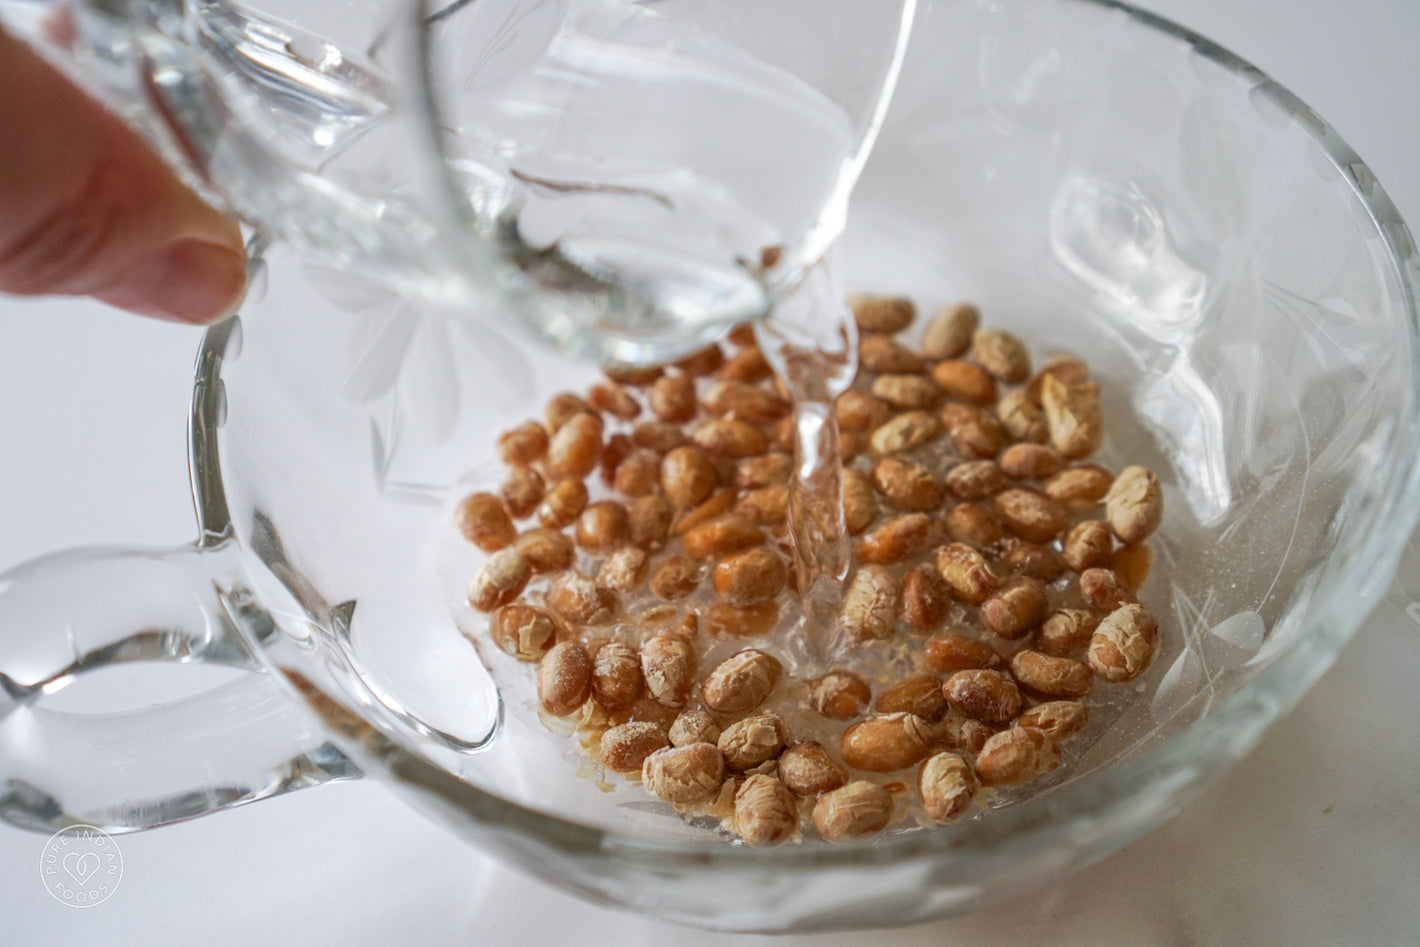 Adding water to a bowl of freeze-dried natto to begin the rehydration process and make soft natto.